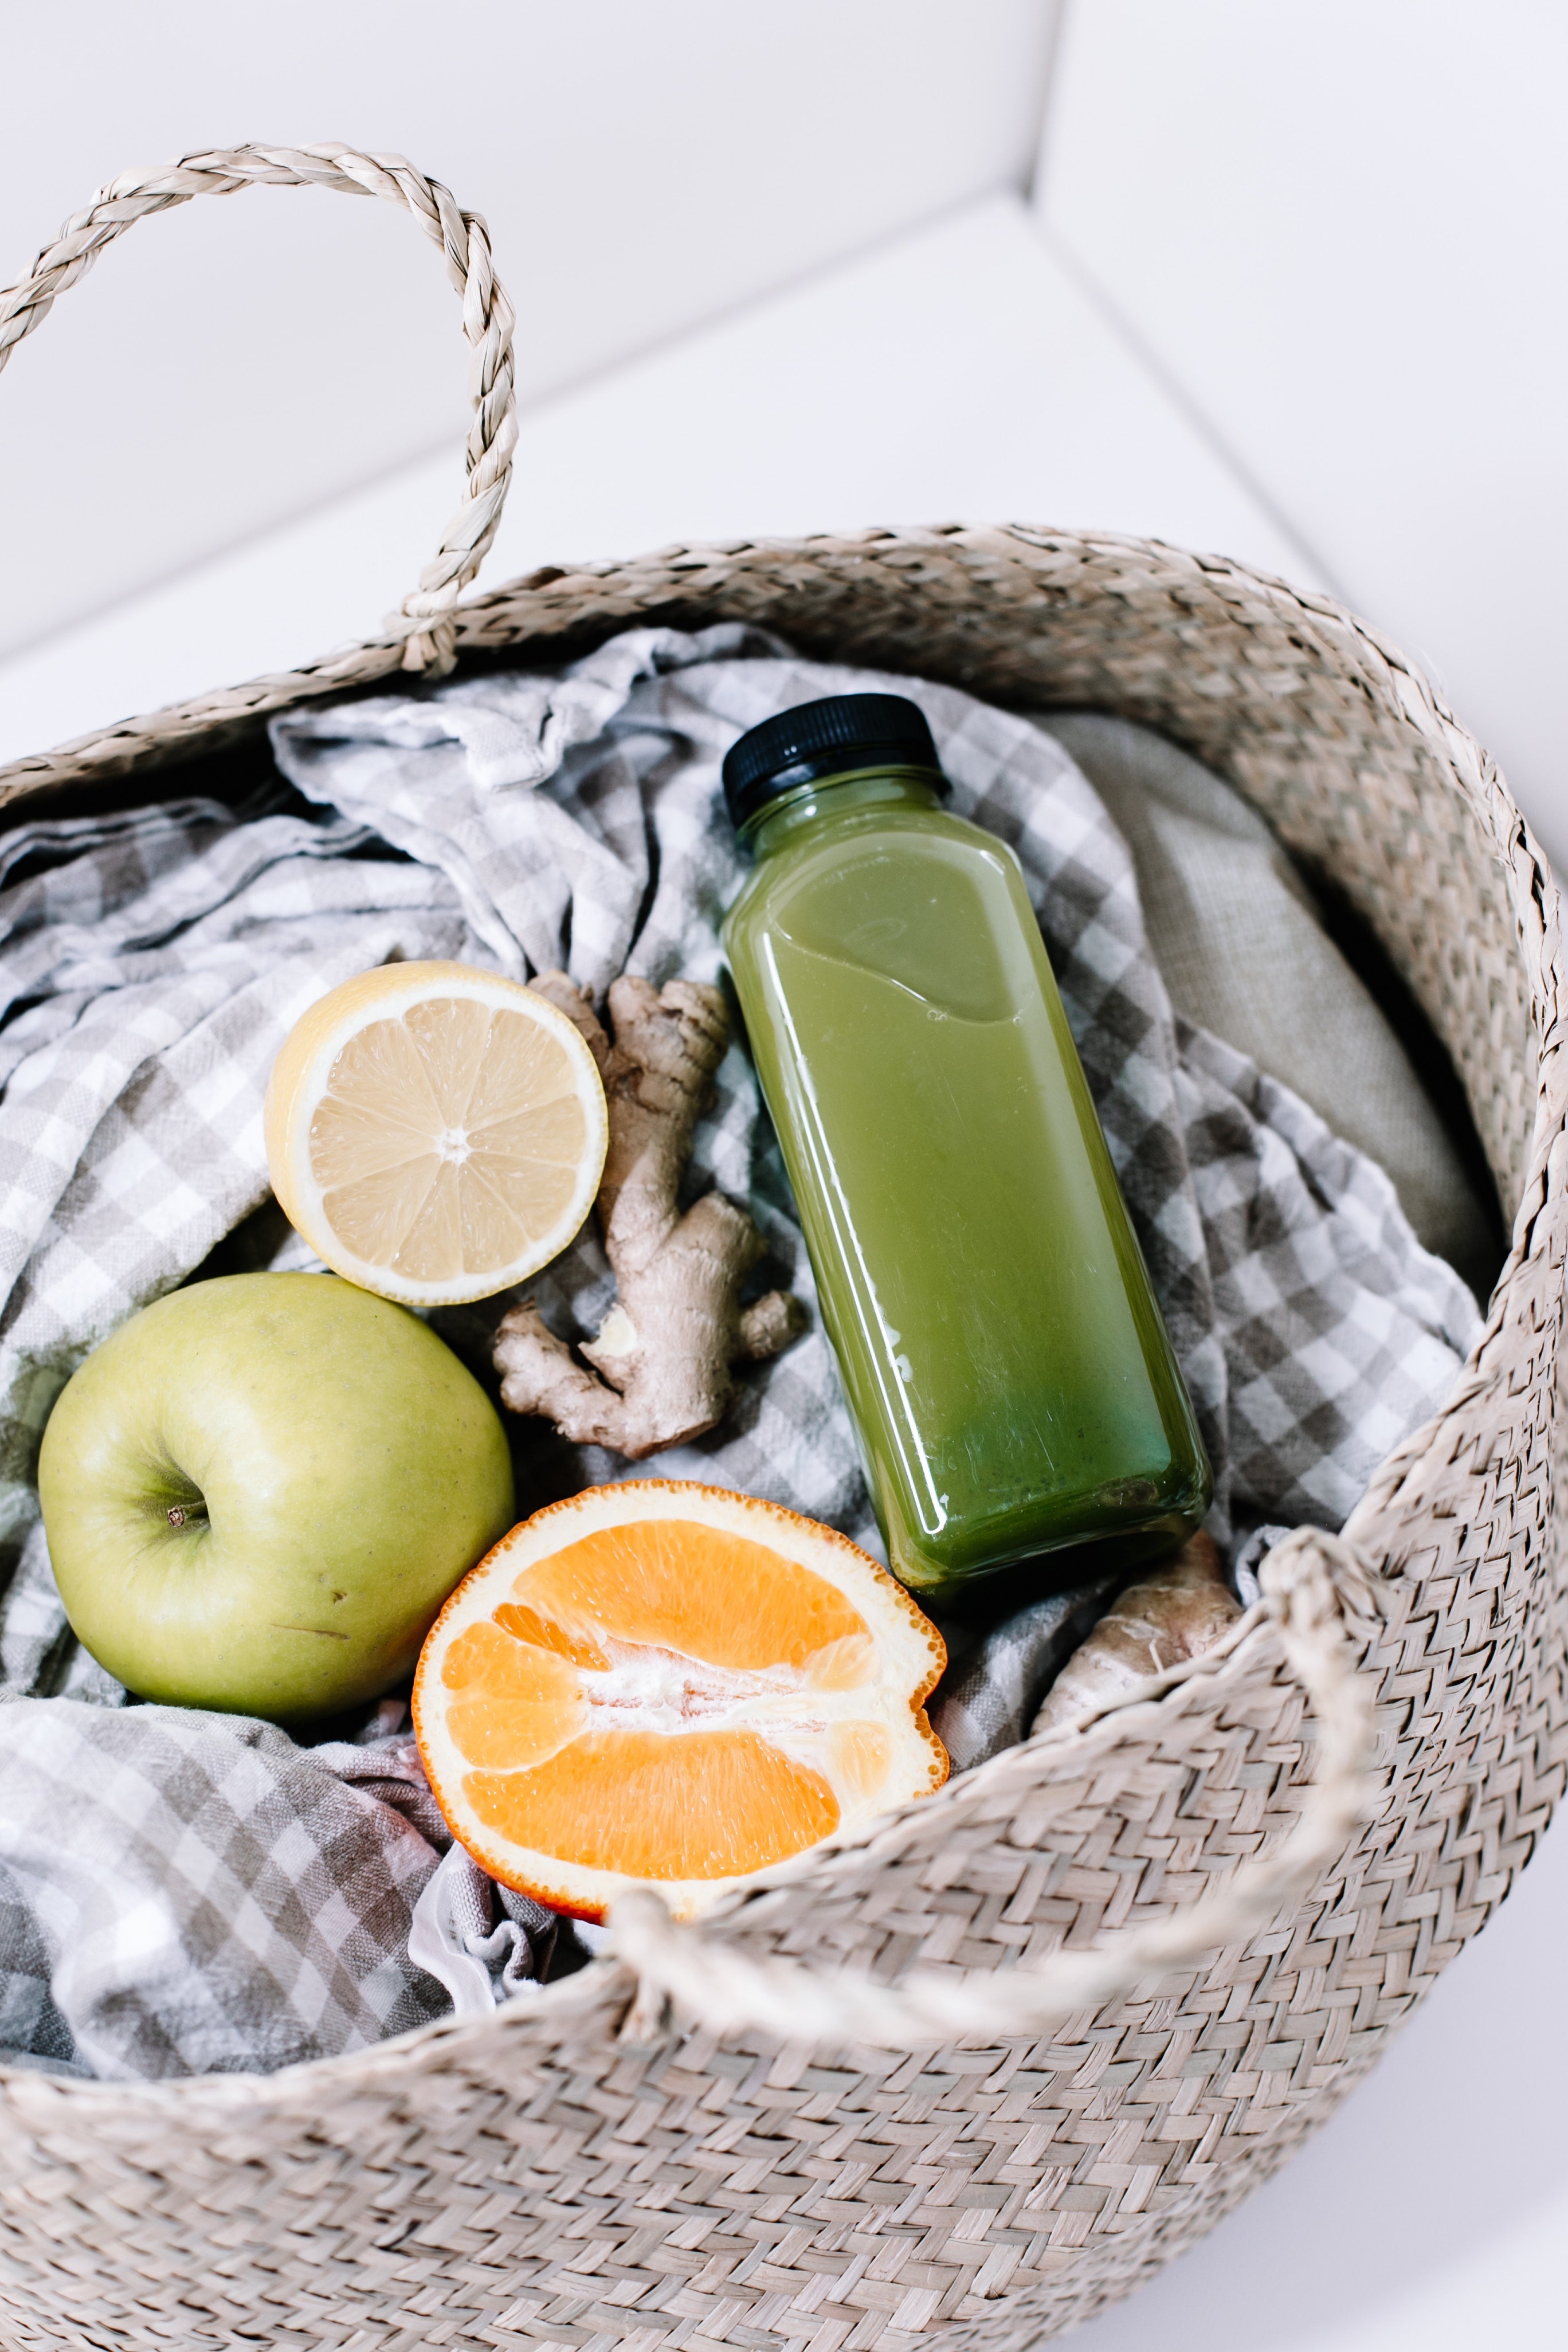 Debunking the Hype: Why Detox Diets May Not Actually Detoxify Your Body